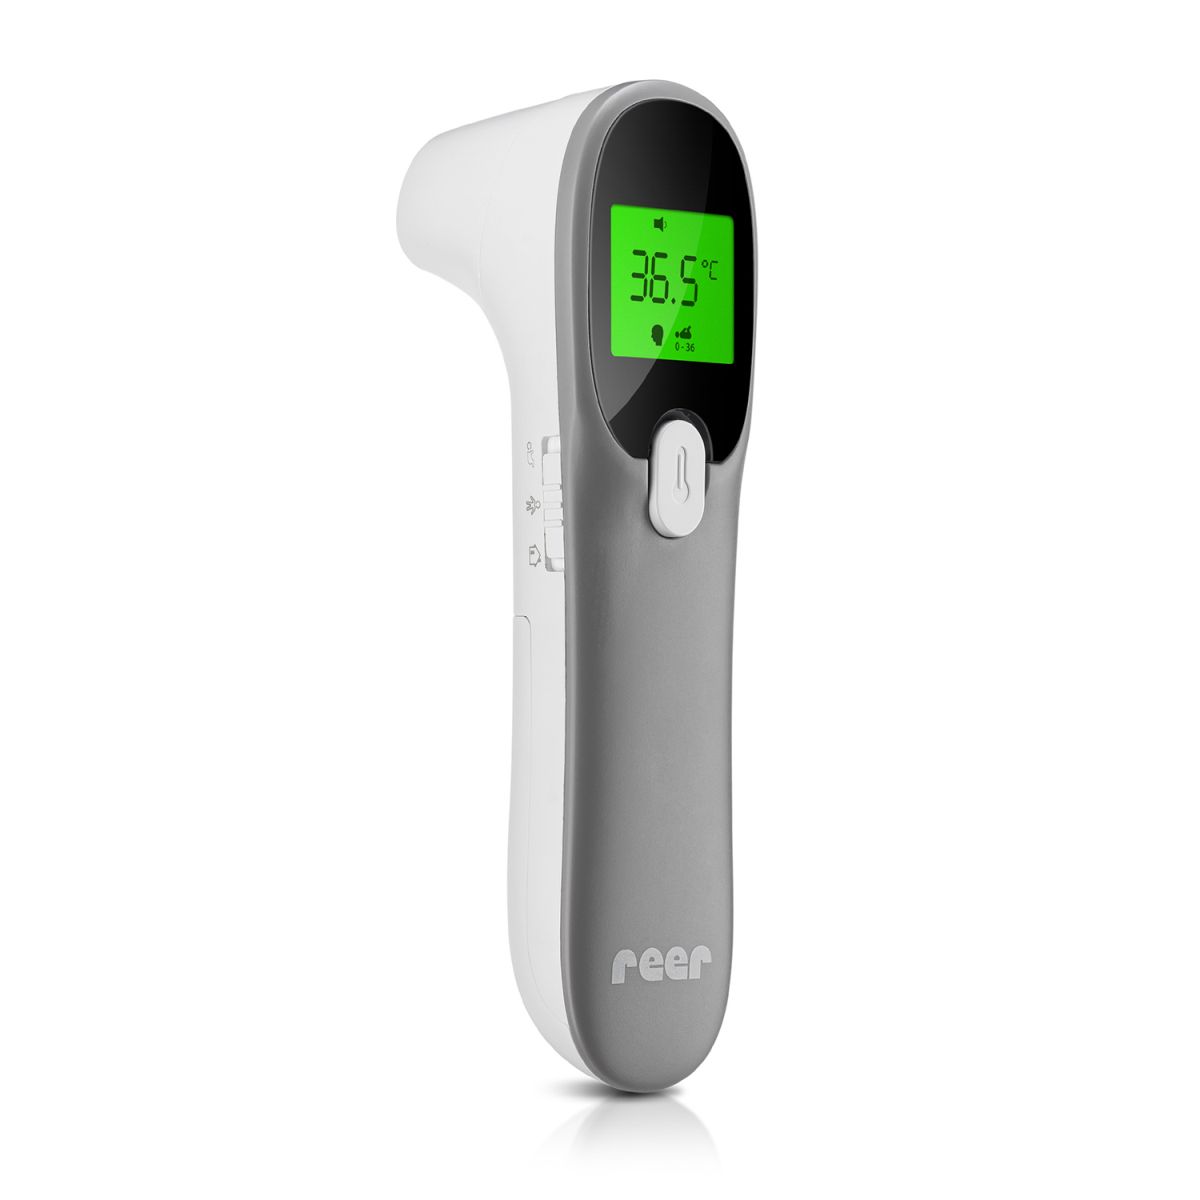 4in1 Colour MaxTemp infrared clinical thermometer